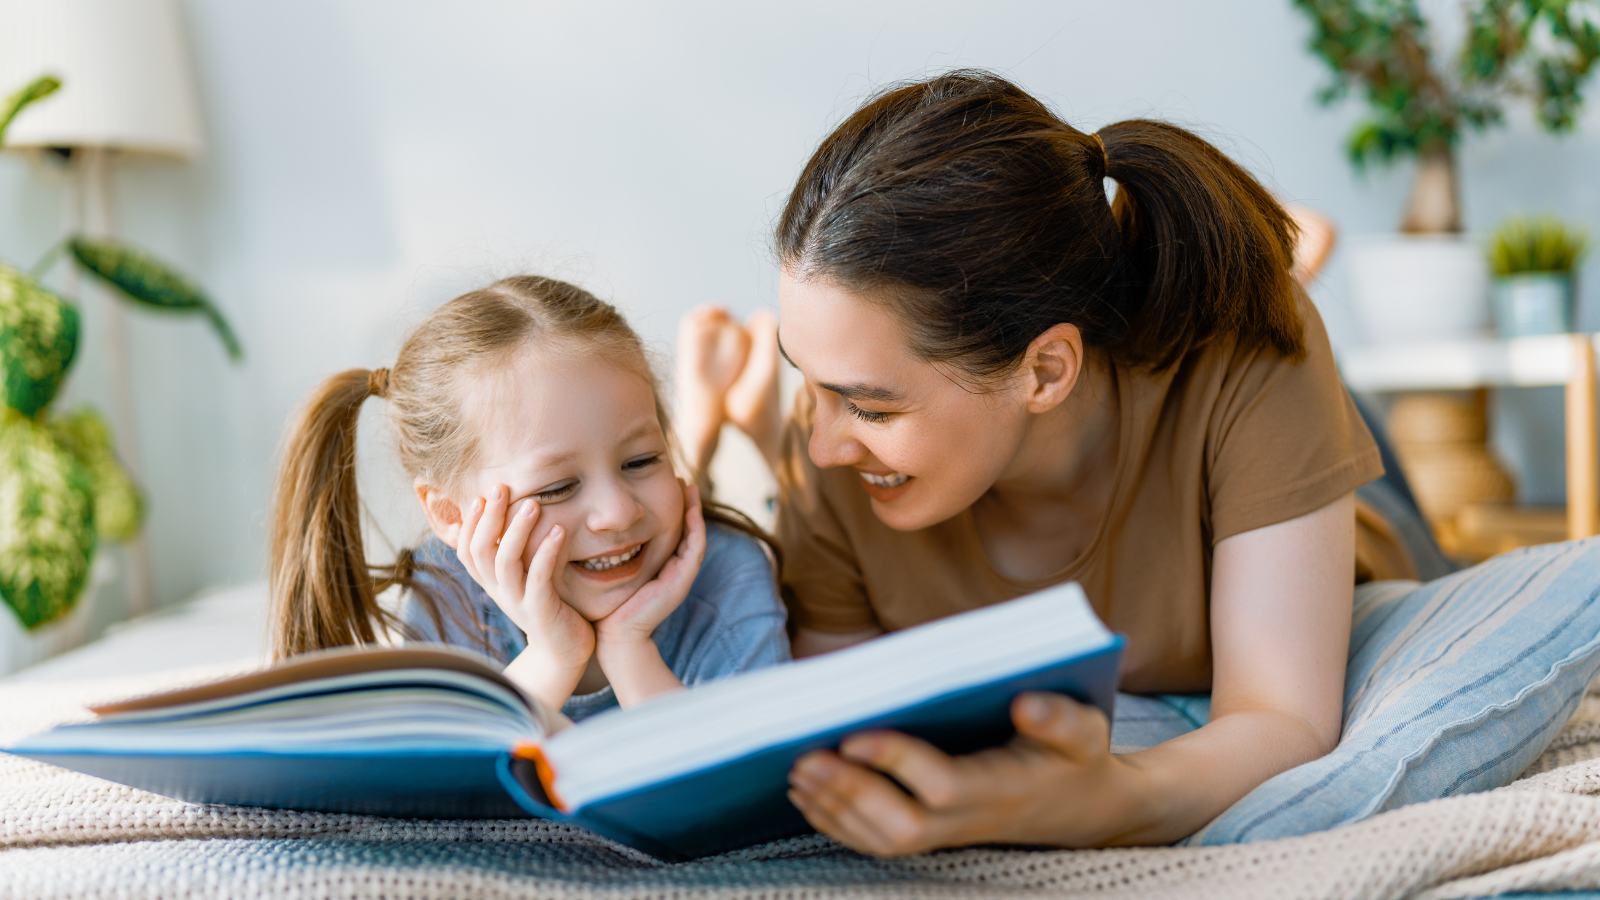 Complete a reading challenge with your kids